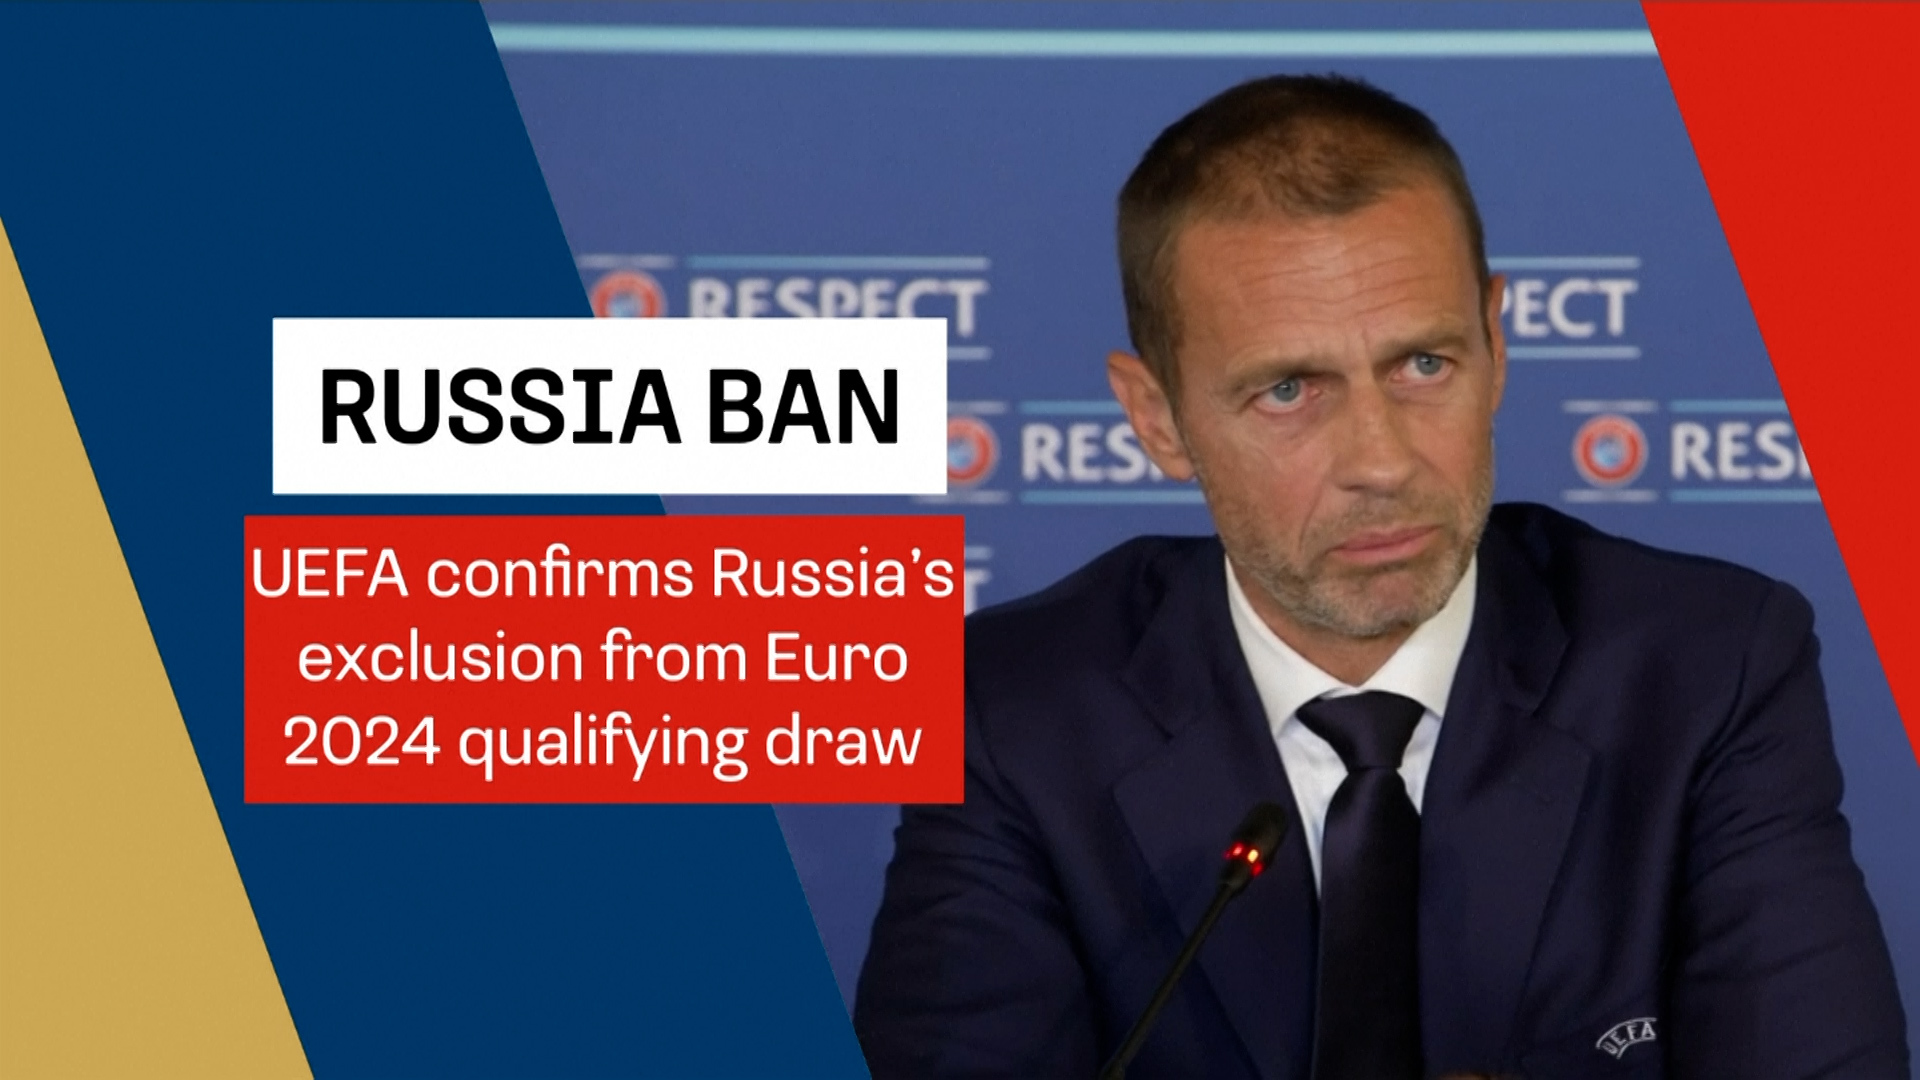 UEFA confirms Russia's exclusion from Euro 2024 qualifying draw